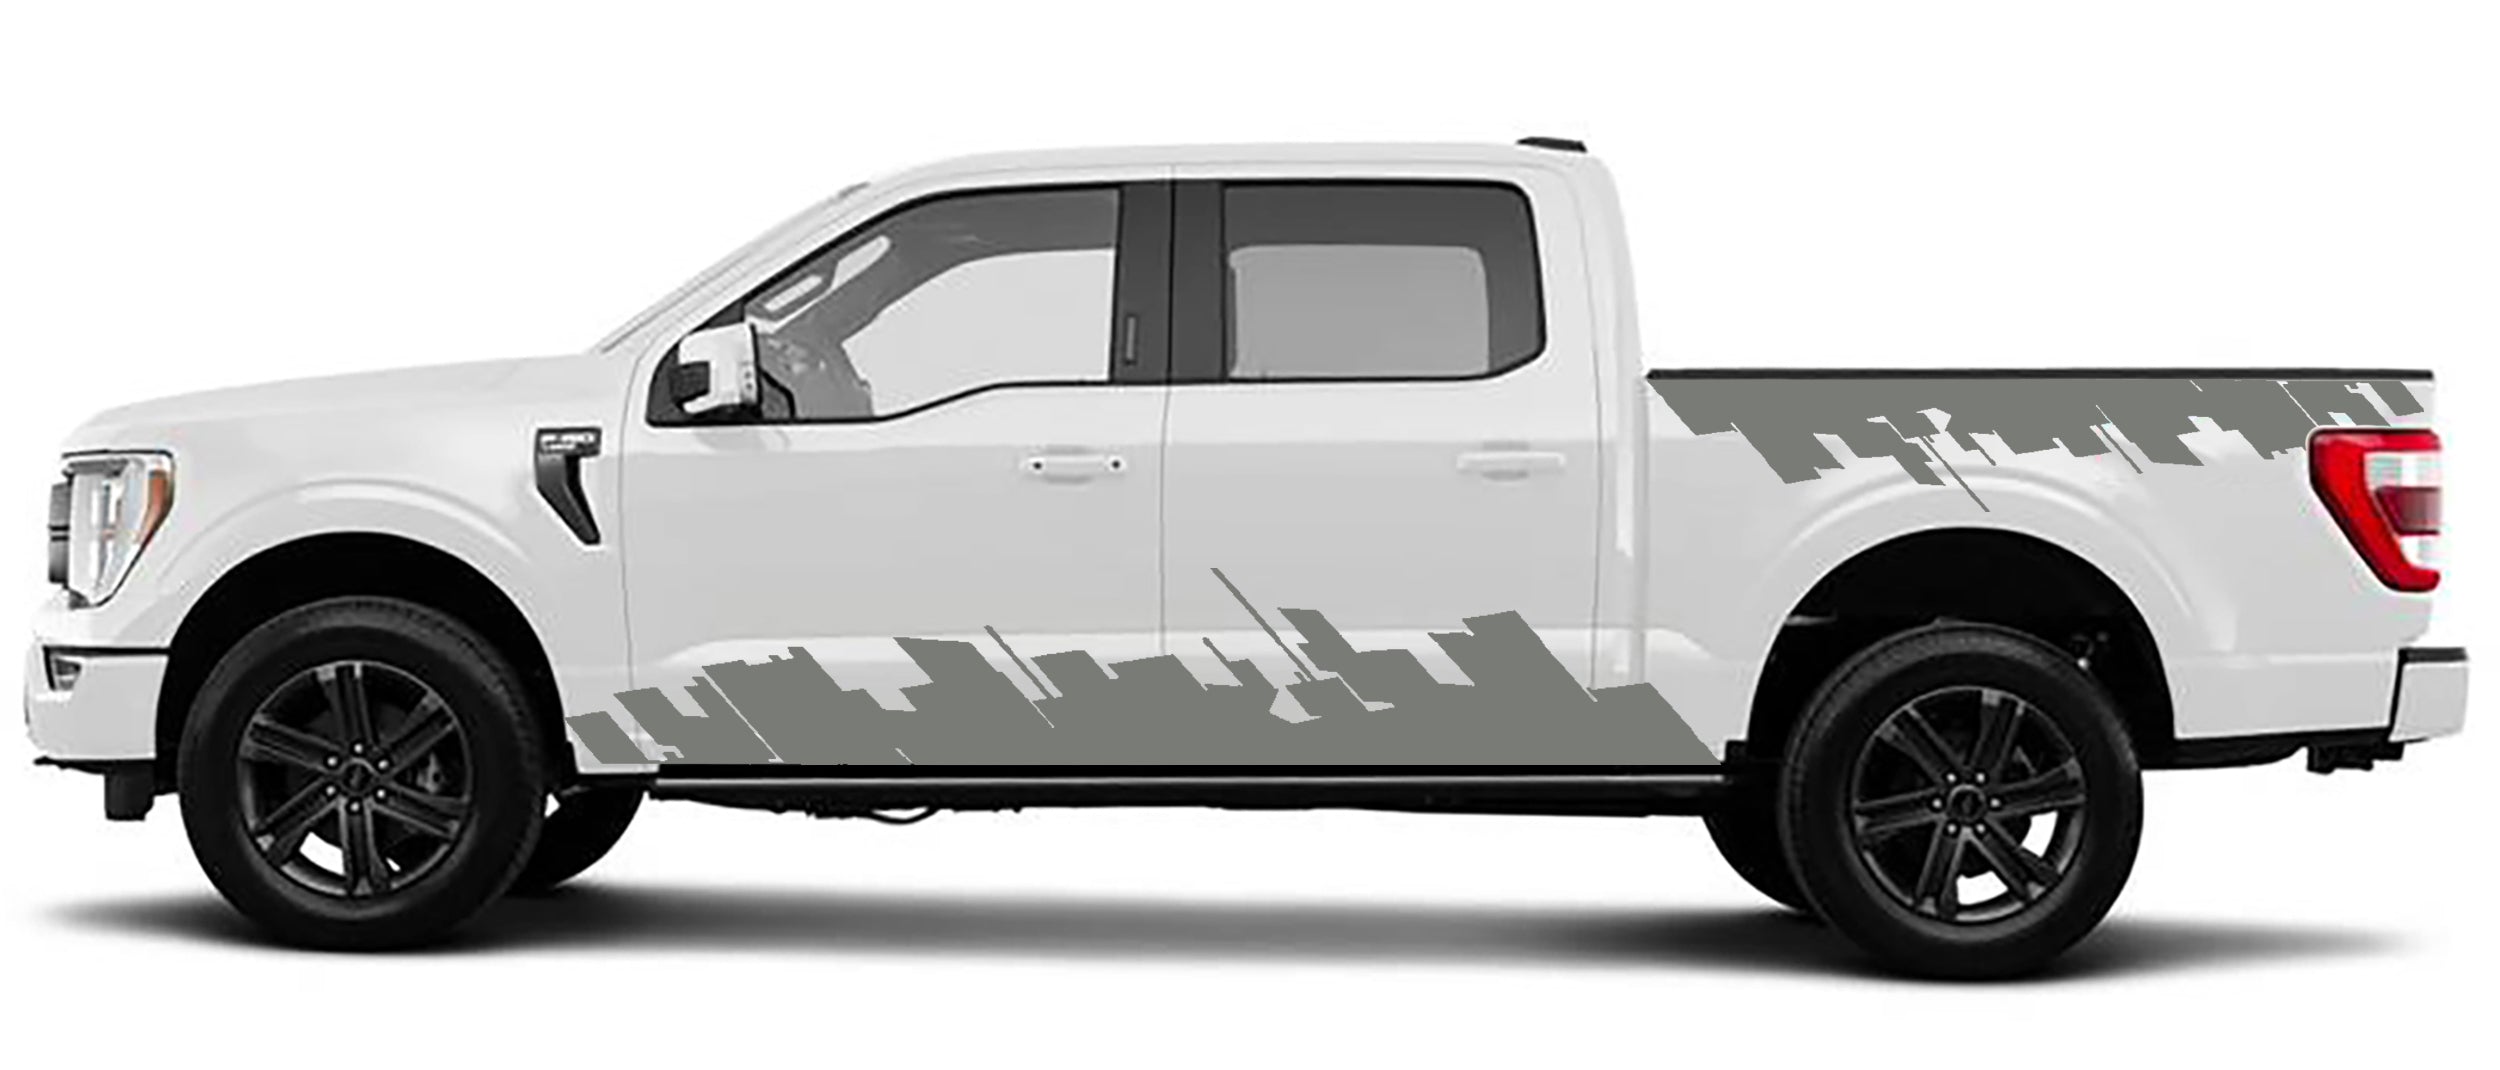 city skyline side graphics for ford f 150 2021 to 2023 models gray